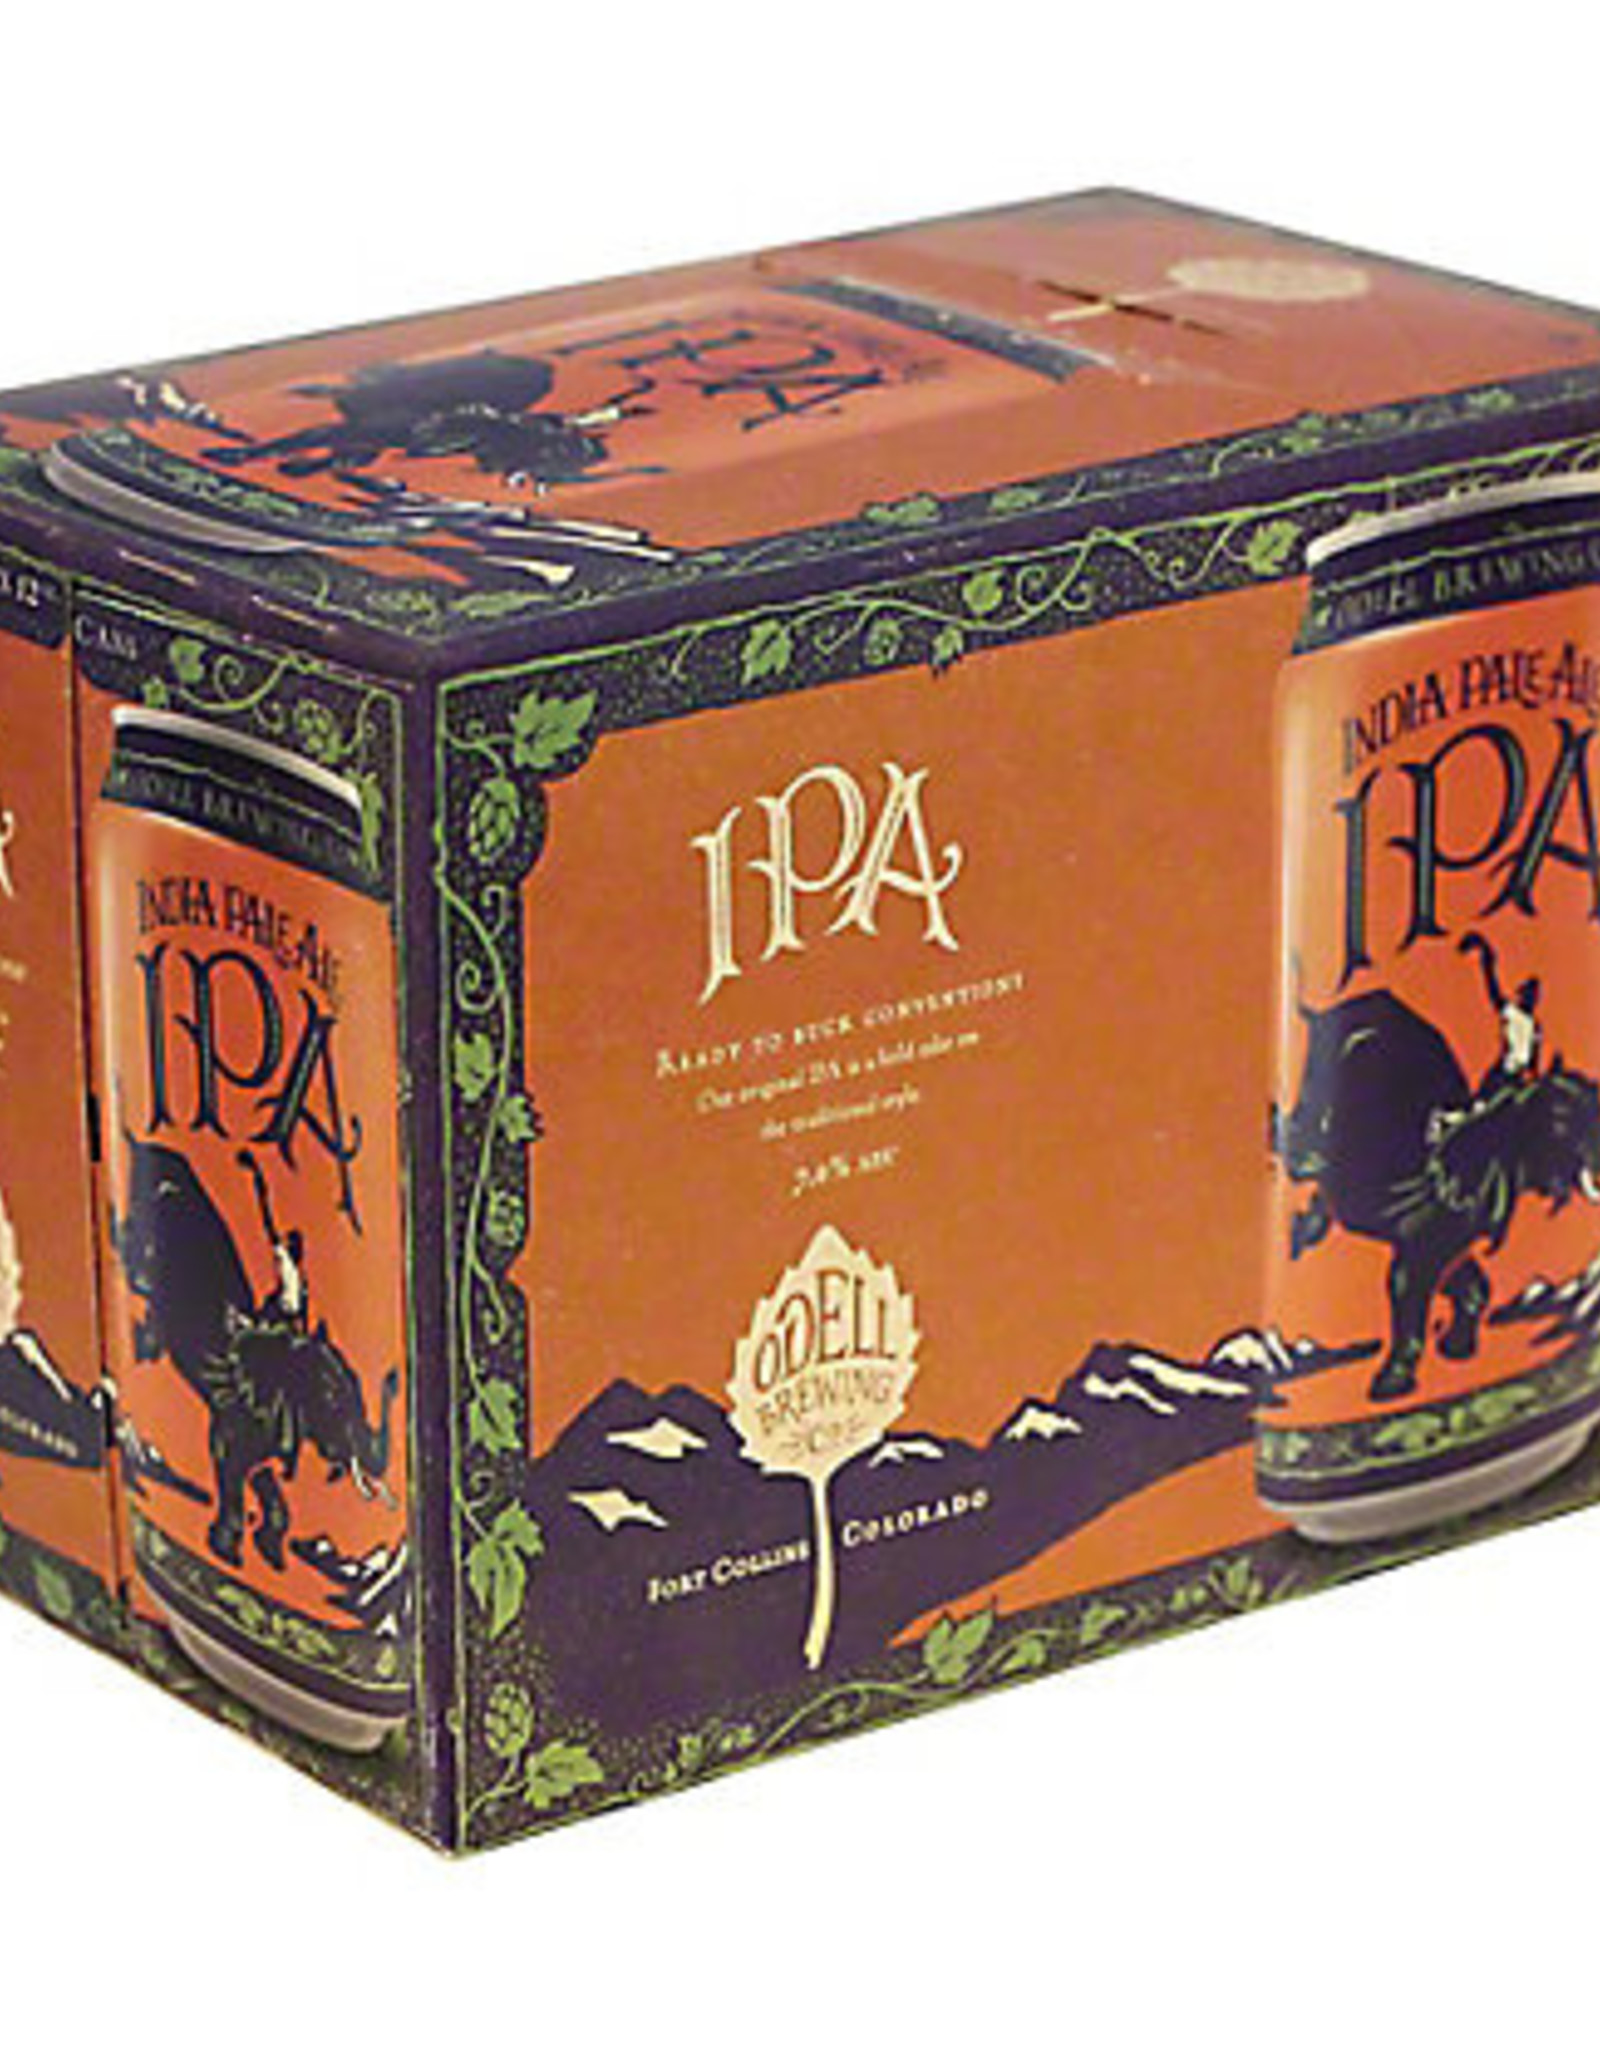 Odell IPA 6x12 oz cans